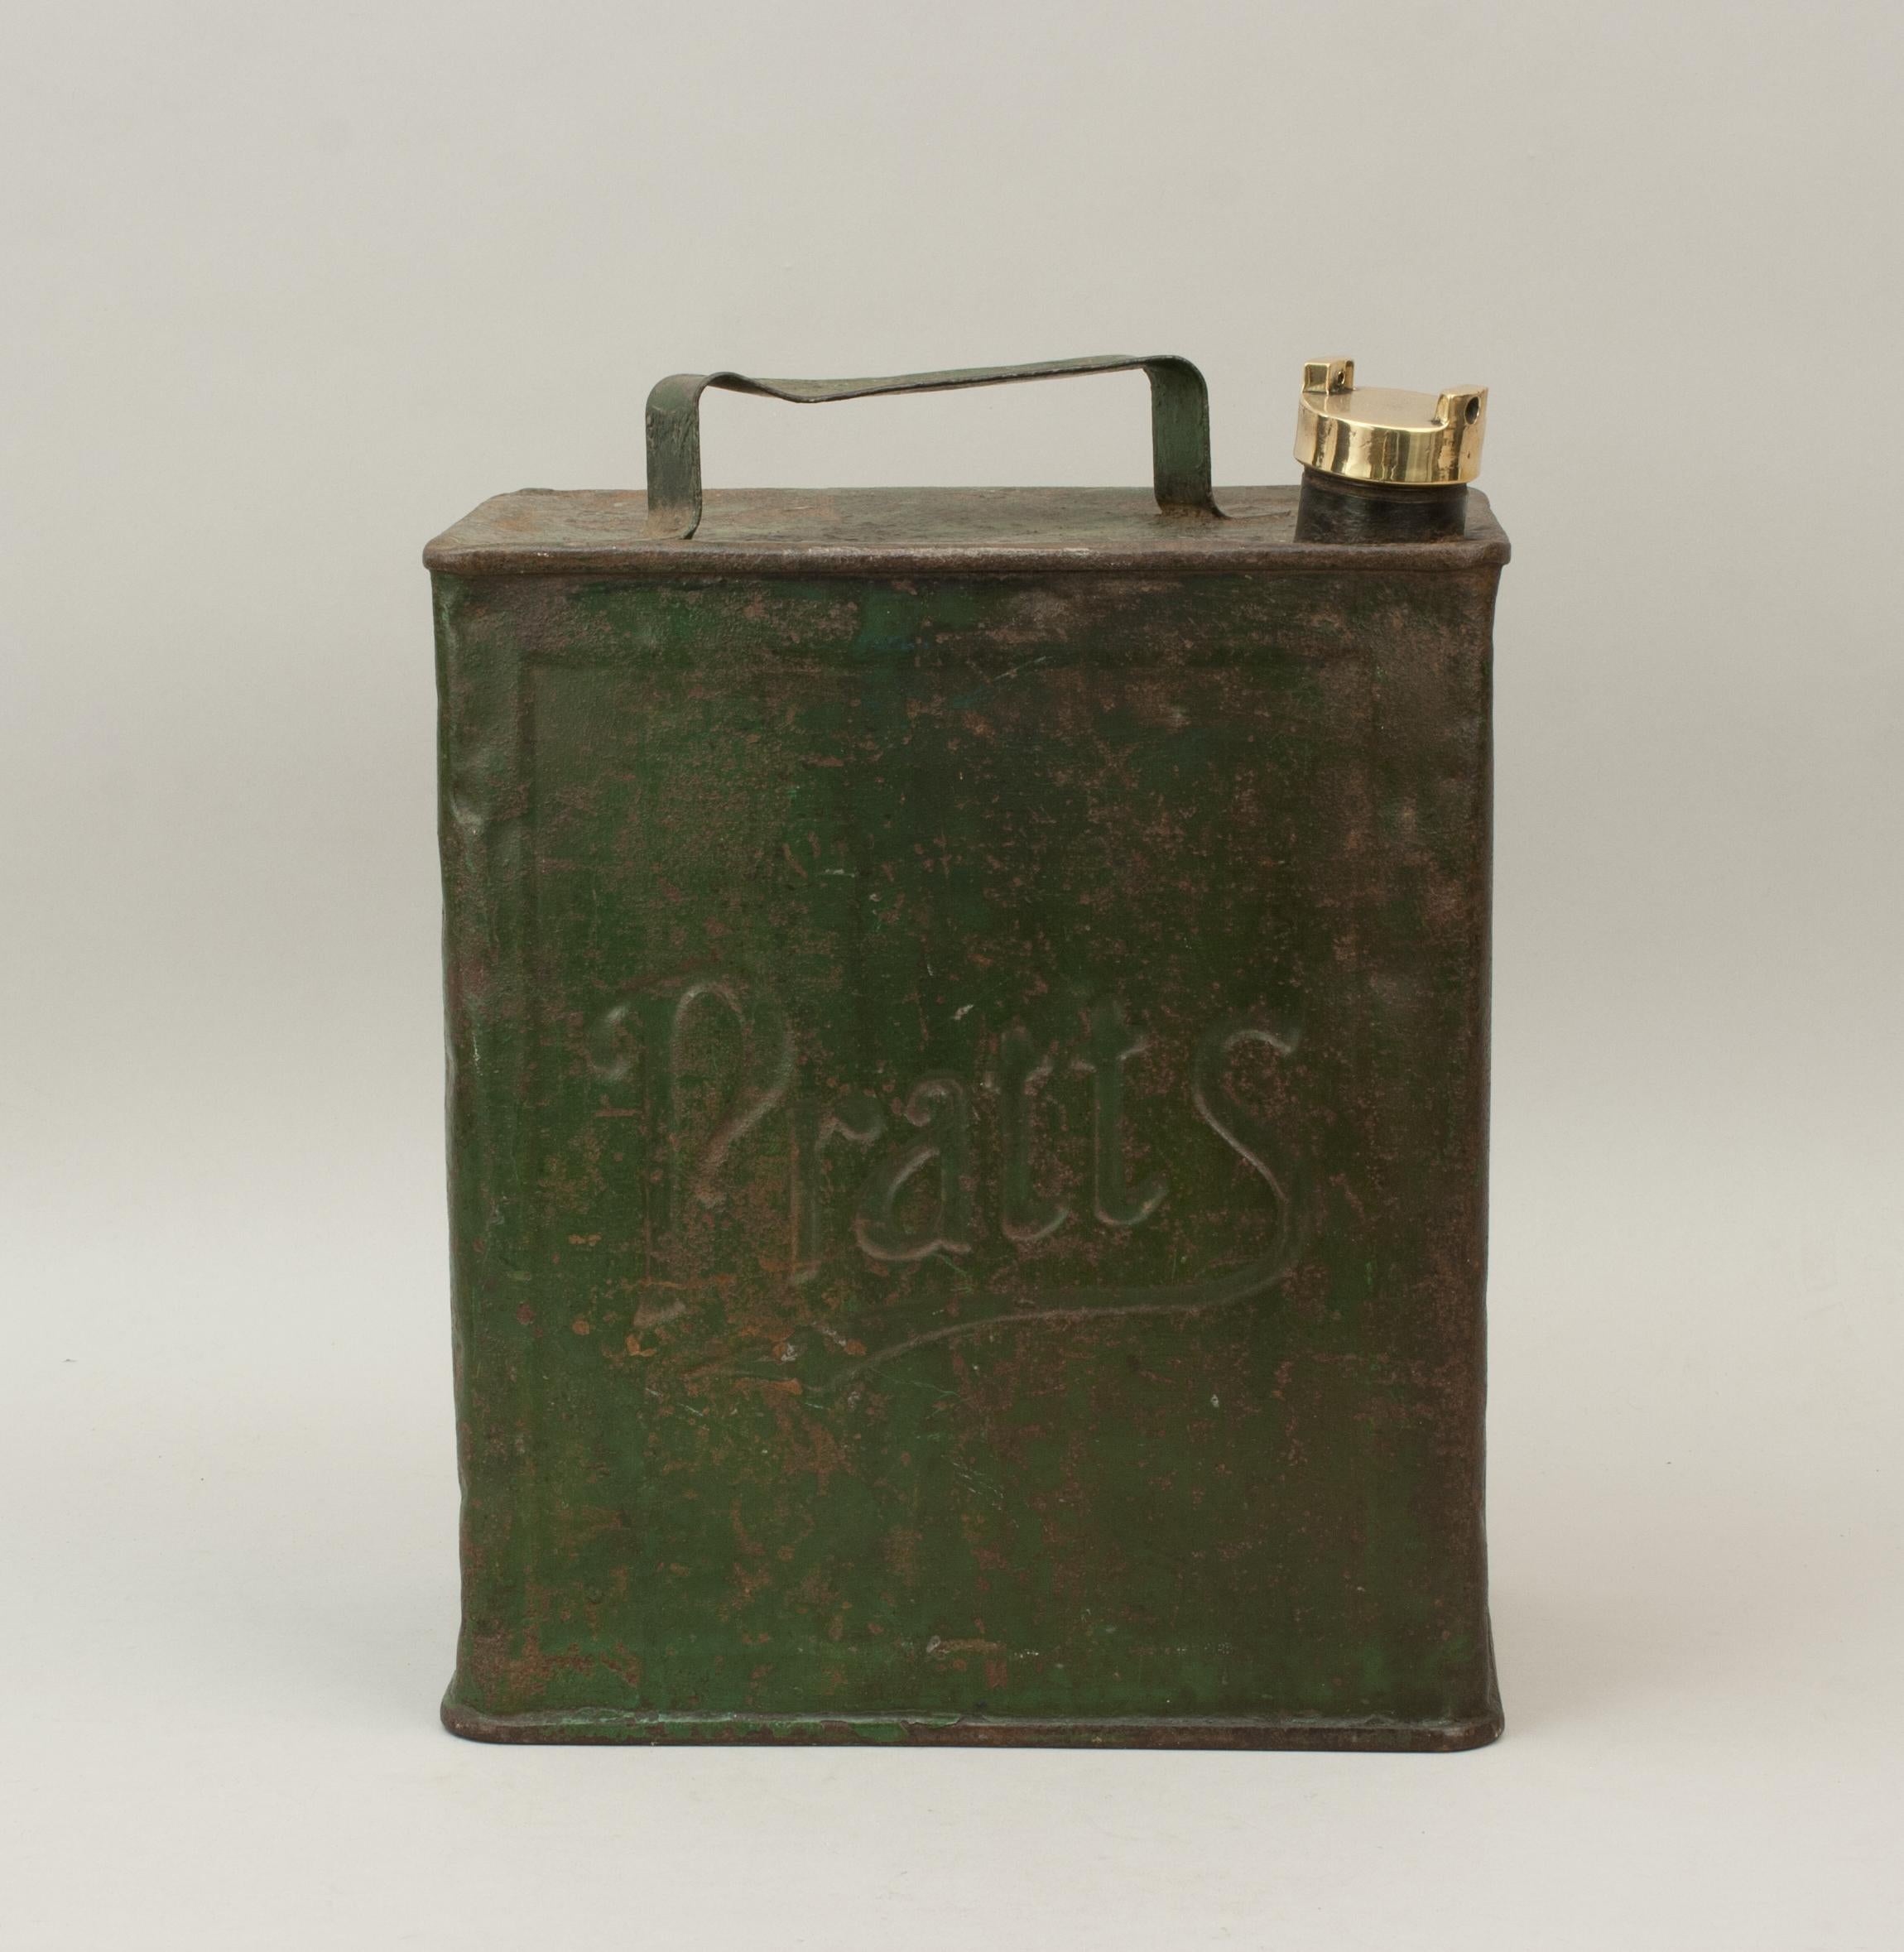 pratts oil can